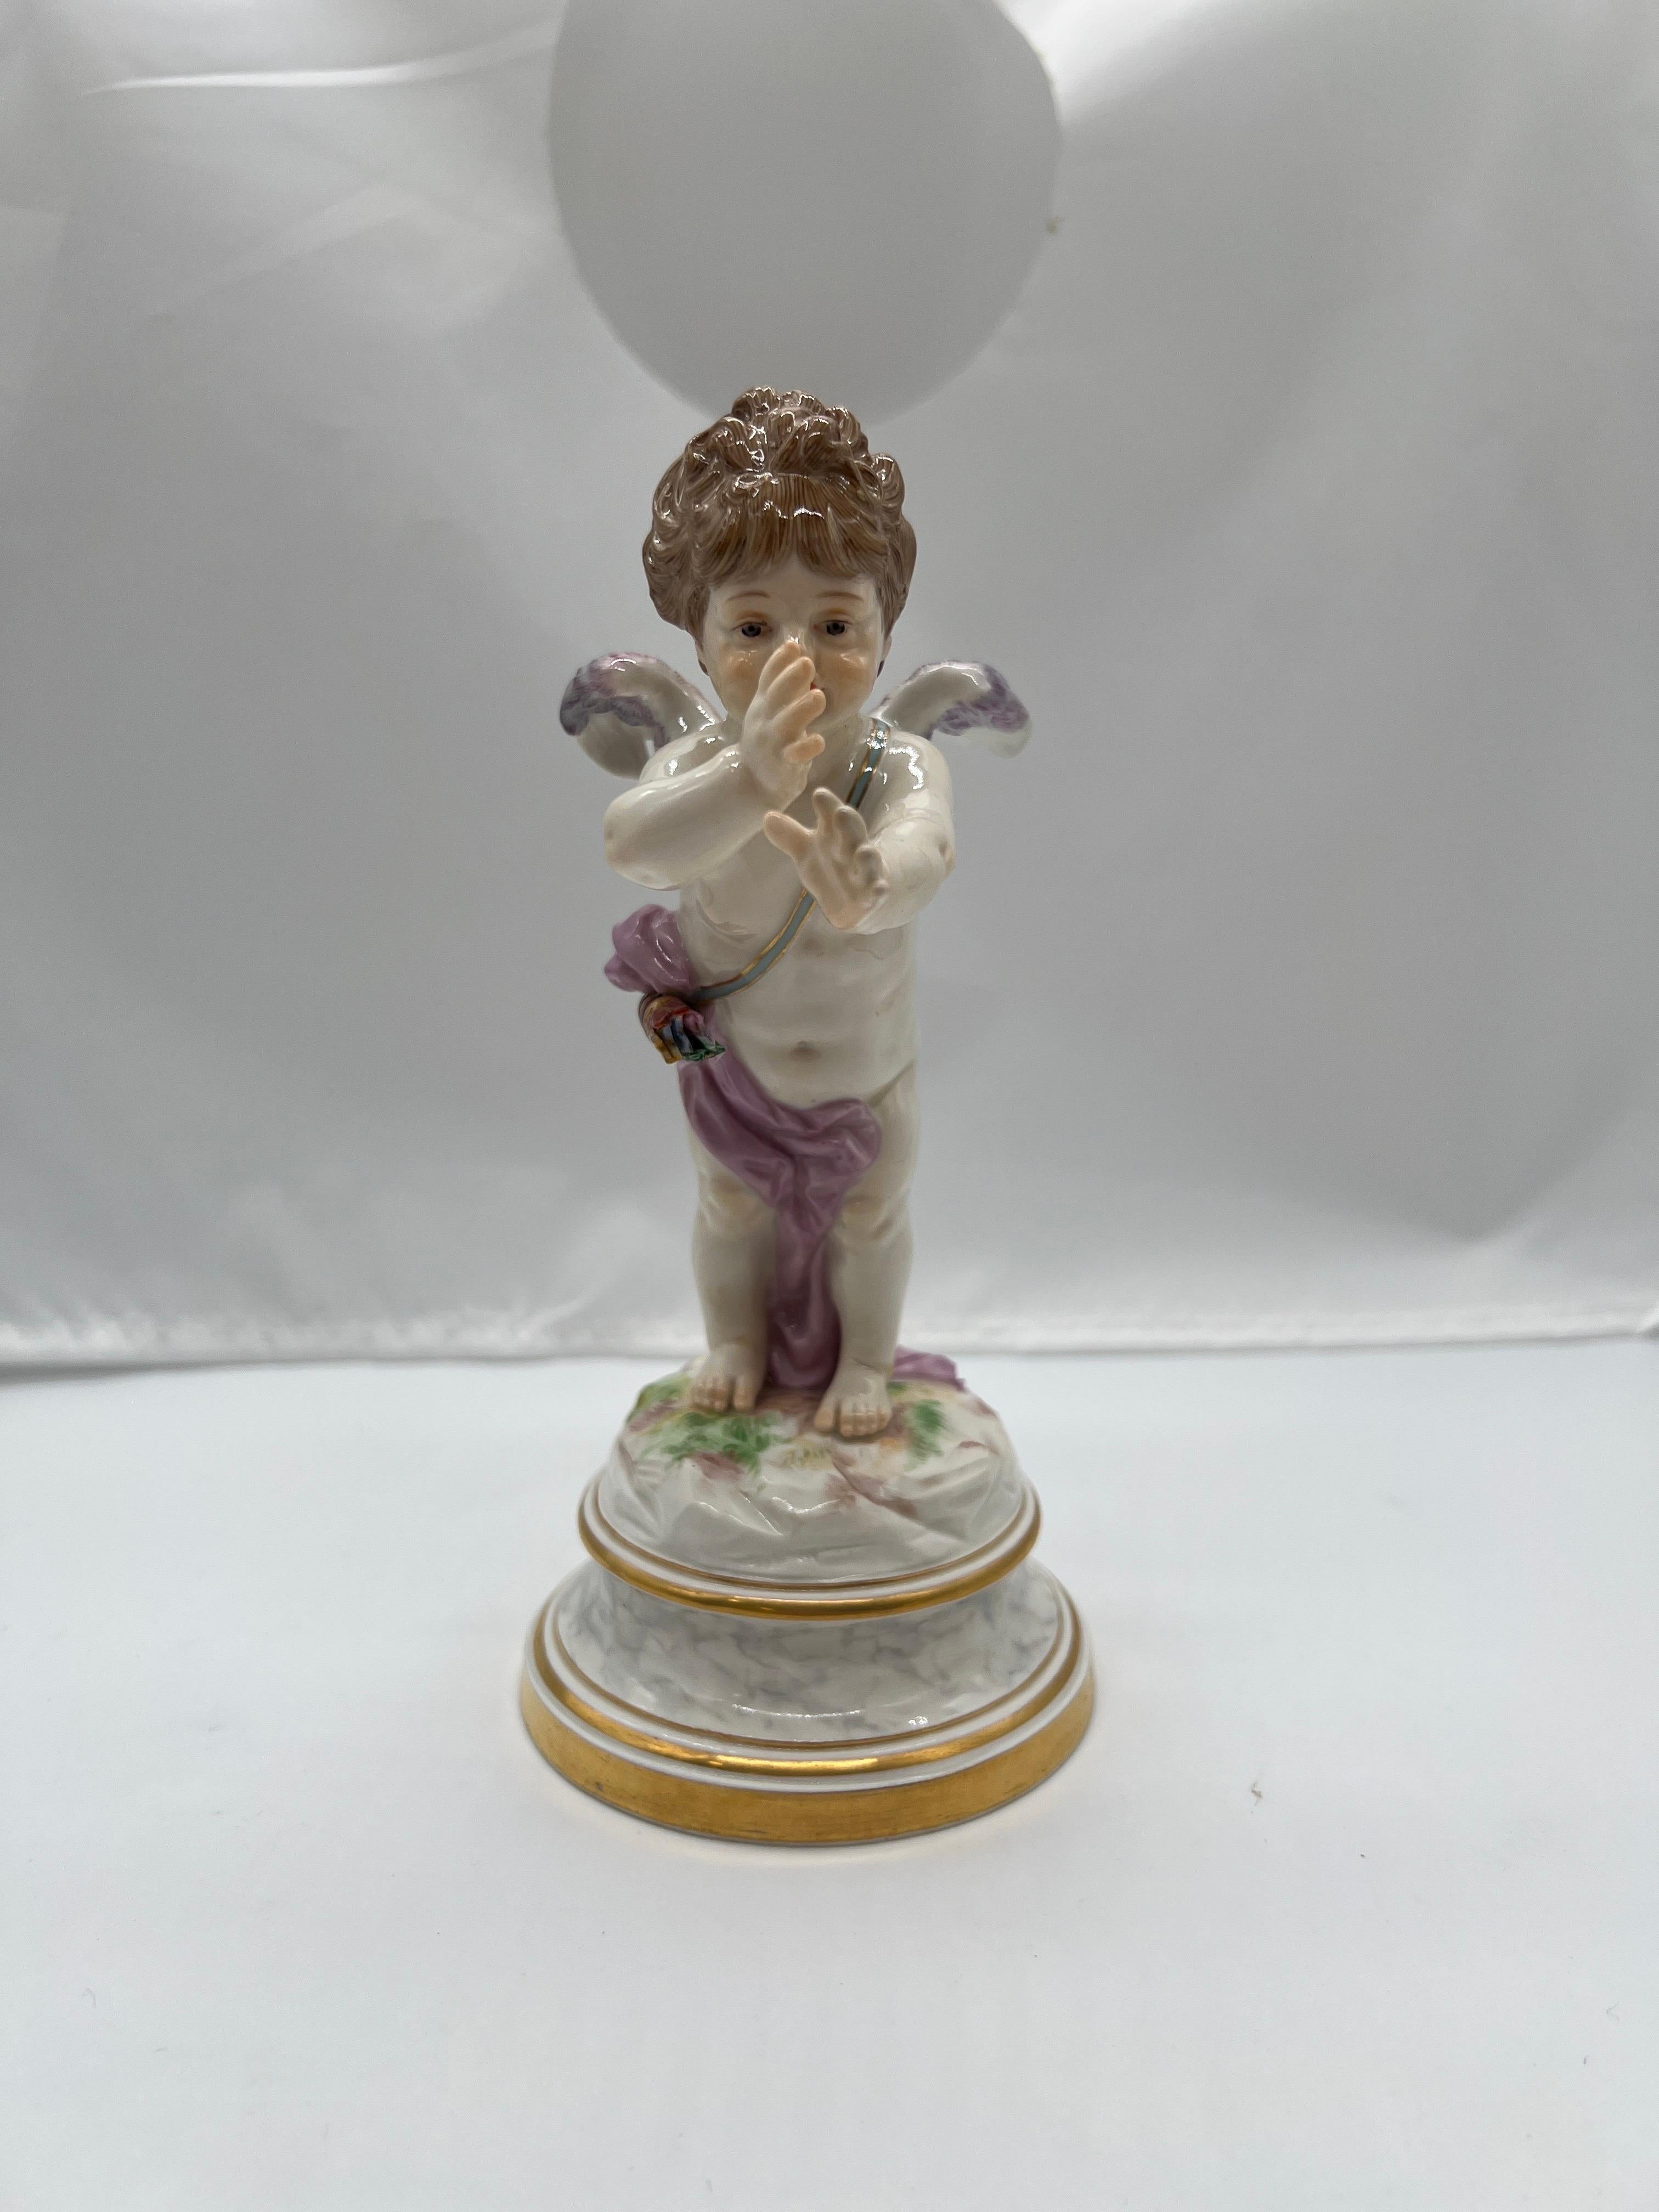 Meissen, 19th century.

A fine quality Meissen porcelain figure featuring a cupid figure draped in a purple cloth with petite wings and very realistic features. This piece was designed by the famous Meissen artist Heinrich Schwabe and is one of the